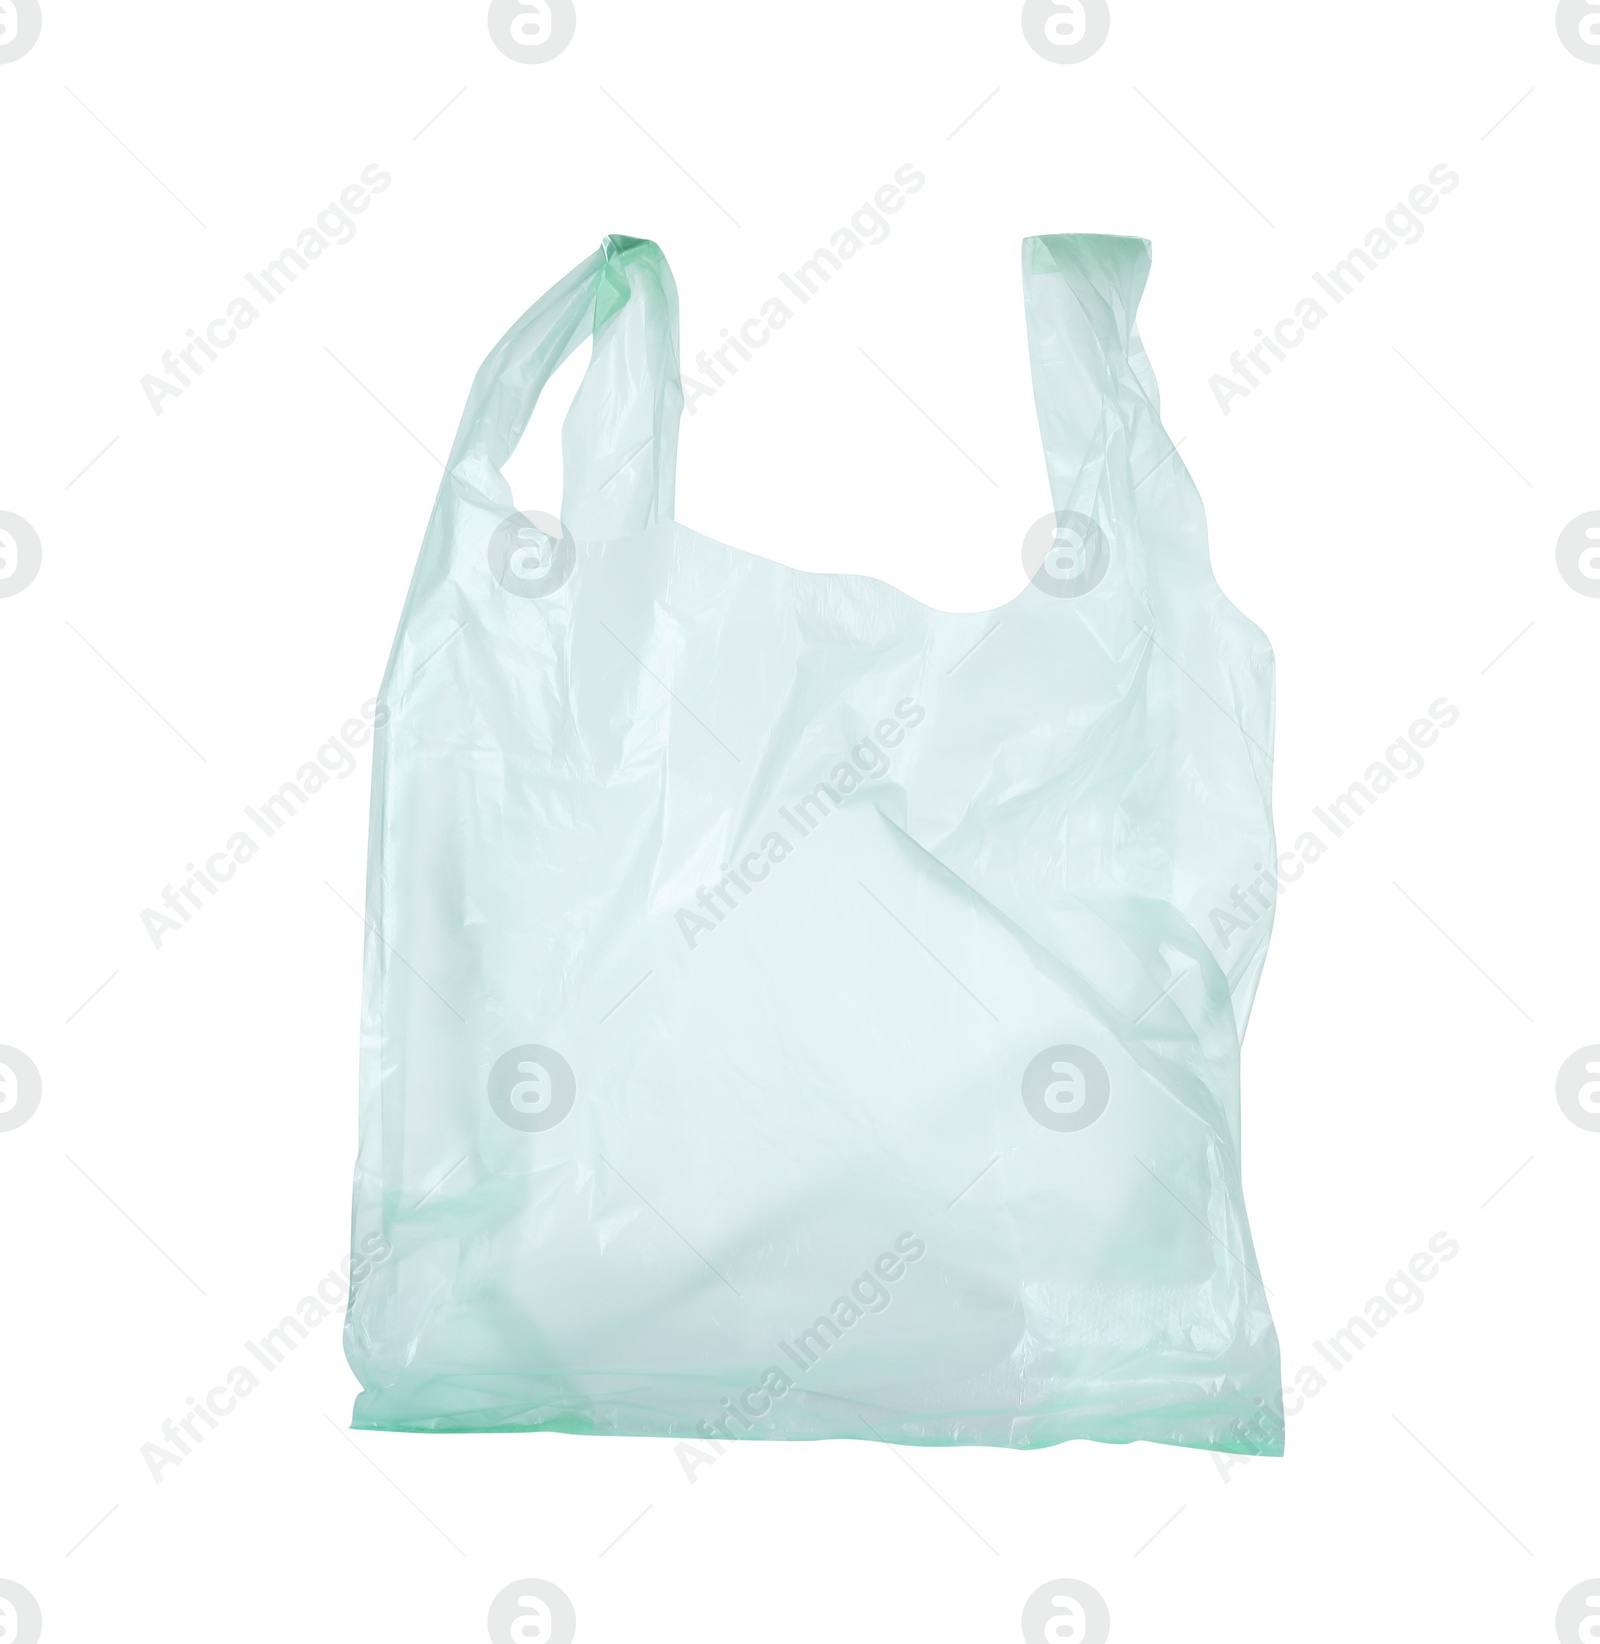 Photo of One light green plastic bag isolated on white